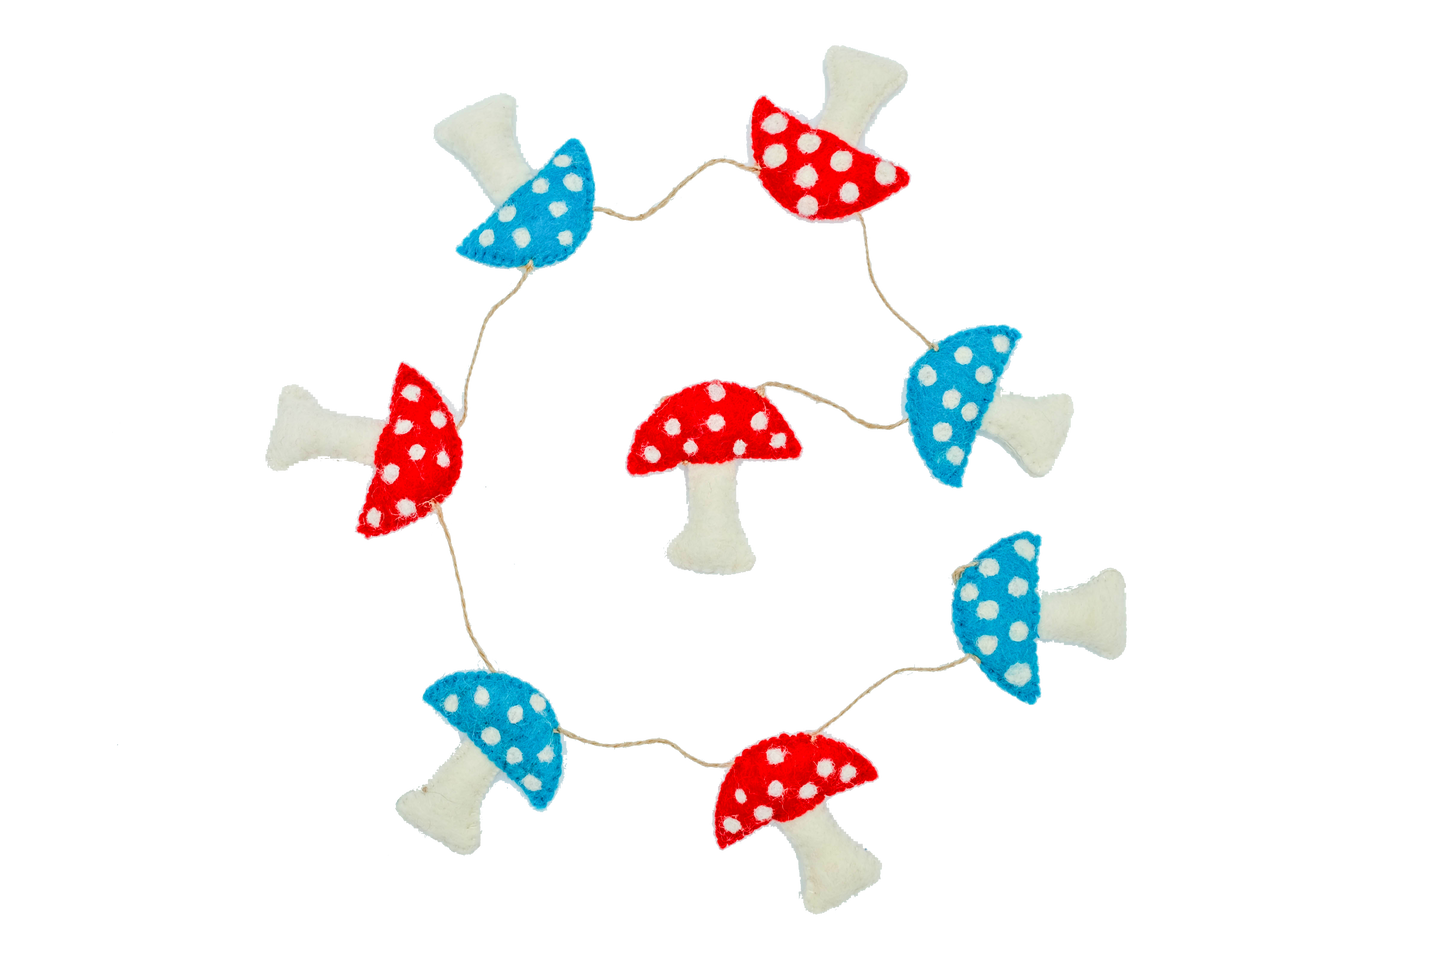 This Global Groove Life, handmade, ethical, fair trade, eco-friendly, sustainable, felt, red, white and turquoise mushroom garland was created by artisans in Kathmandu Nepal and will bring beautiful color, warmth and fun to your home.